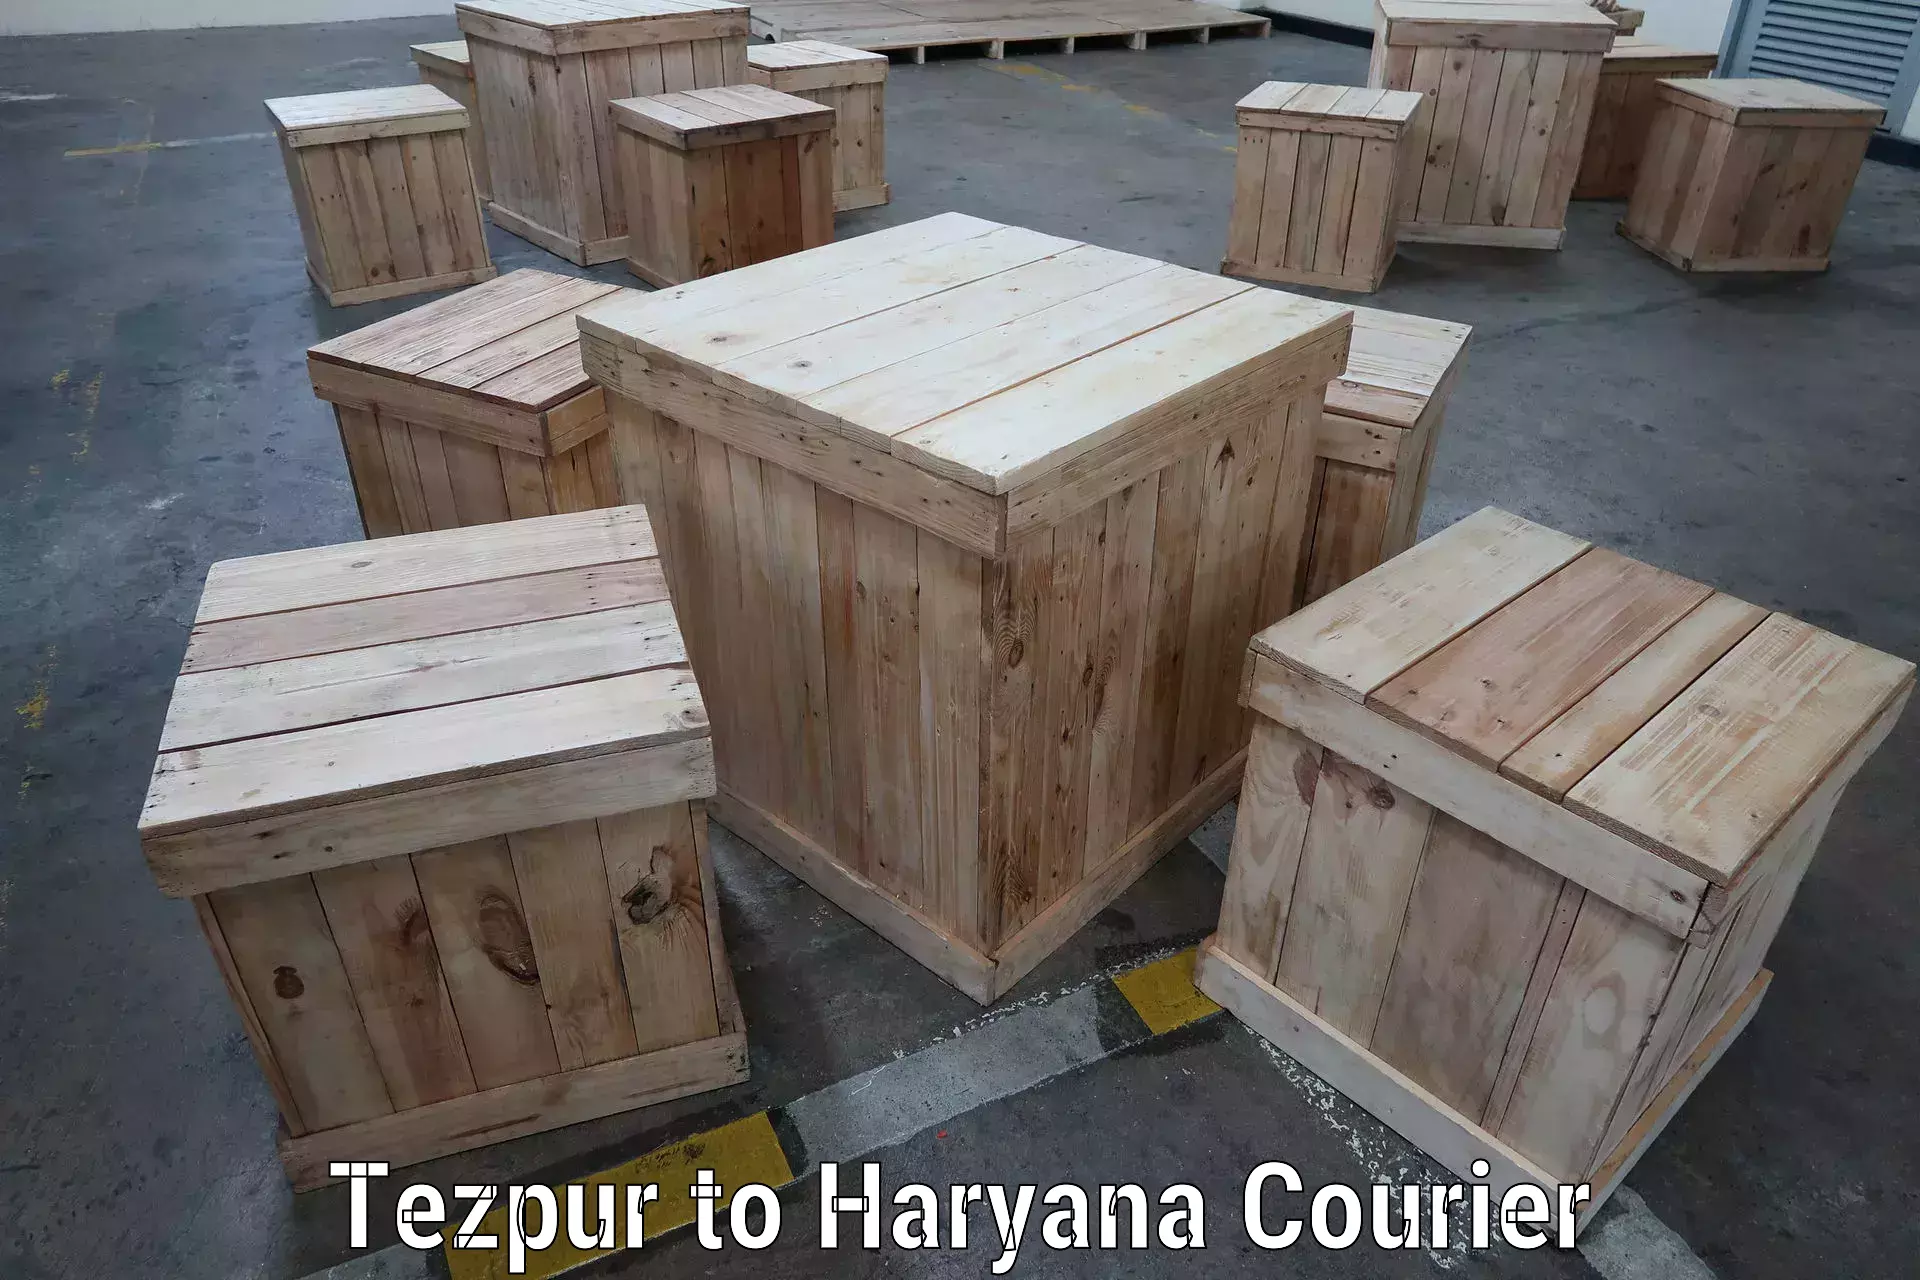 User-friendly delivery service Tezpur to Haryana